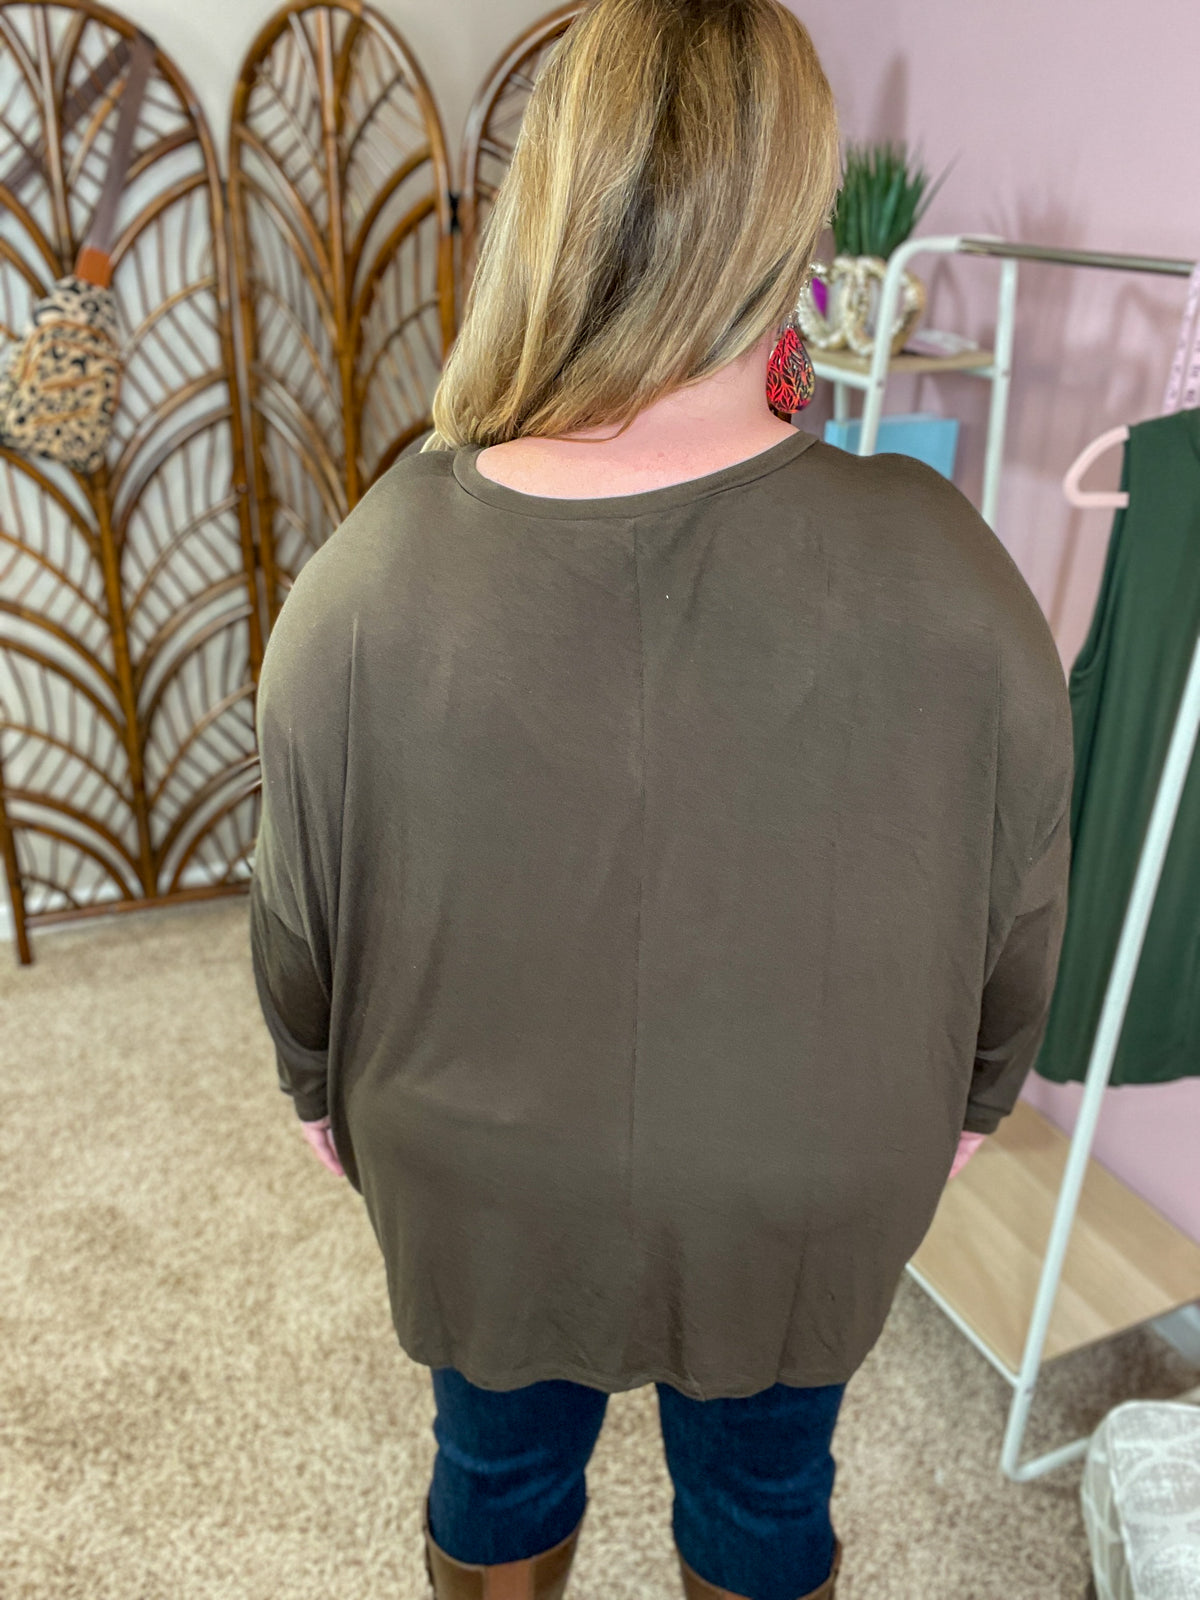 Comforts of Fall Slouchy Top - Dark Olive